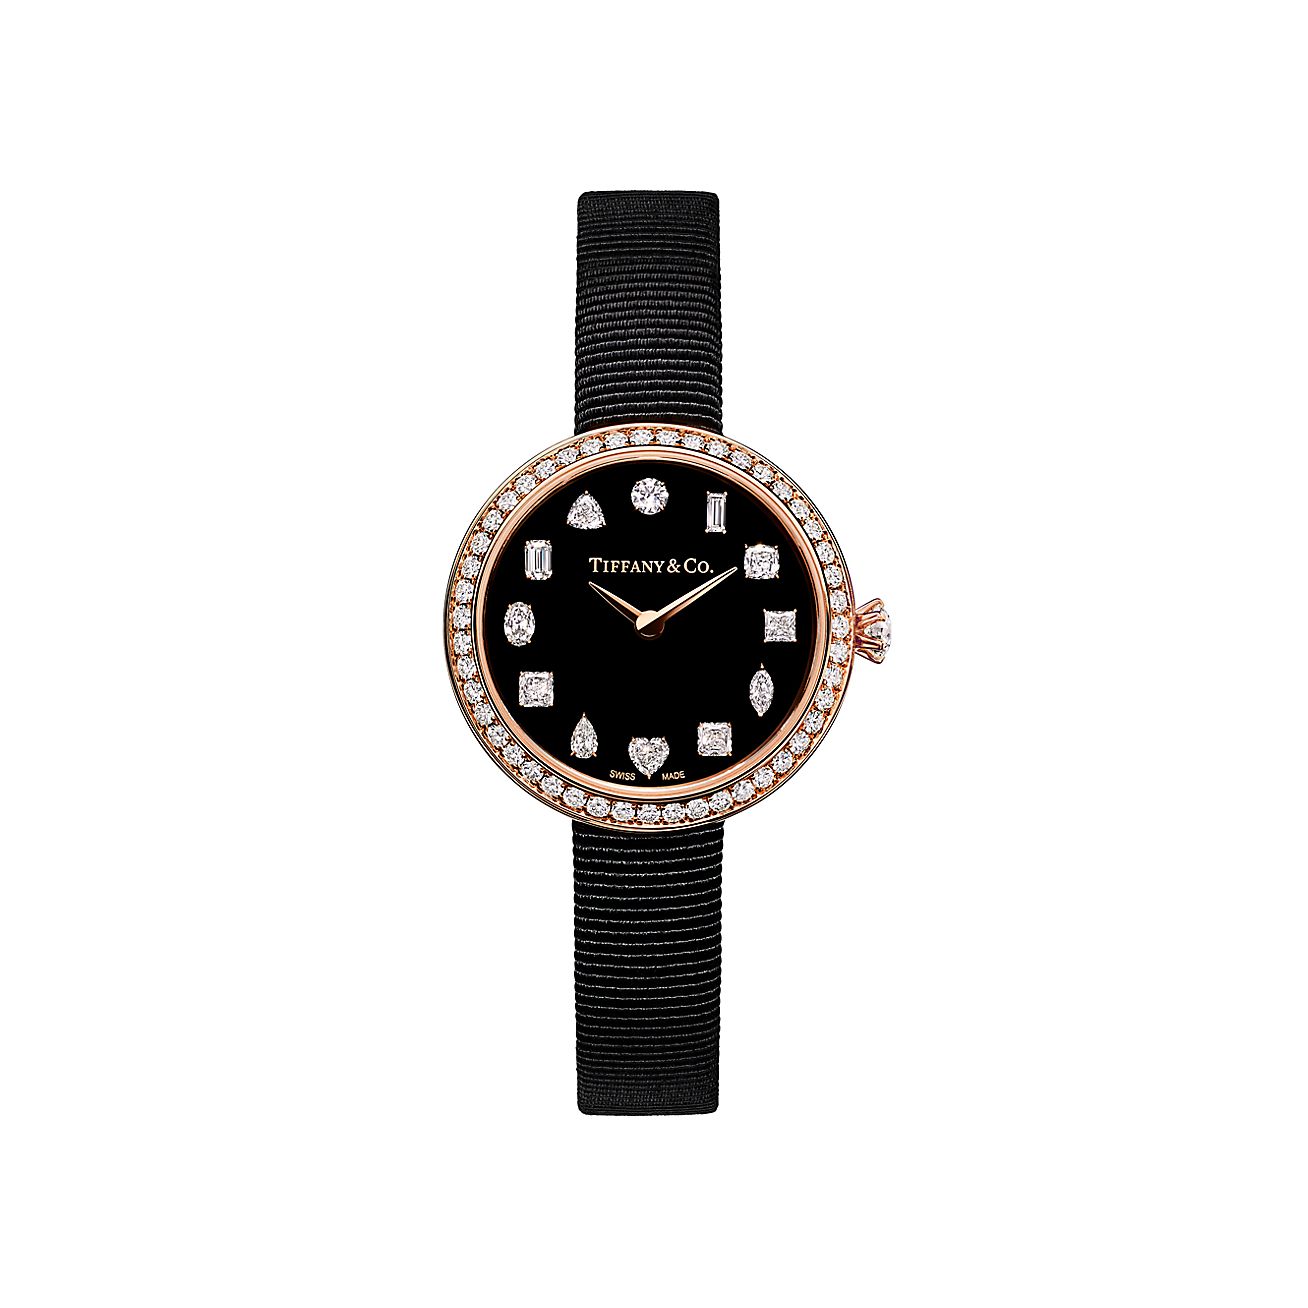 Tiffany Eternity28 mm Round Watch
in Rose Gold with Diamonds